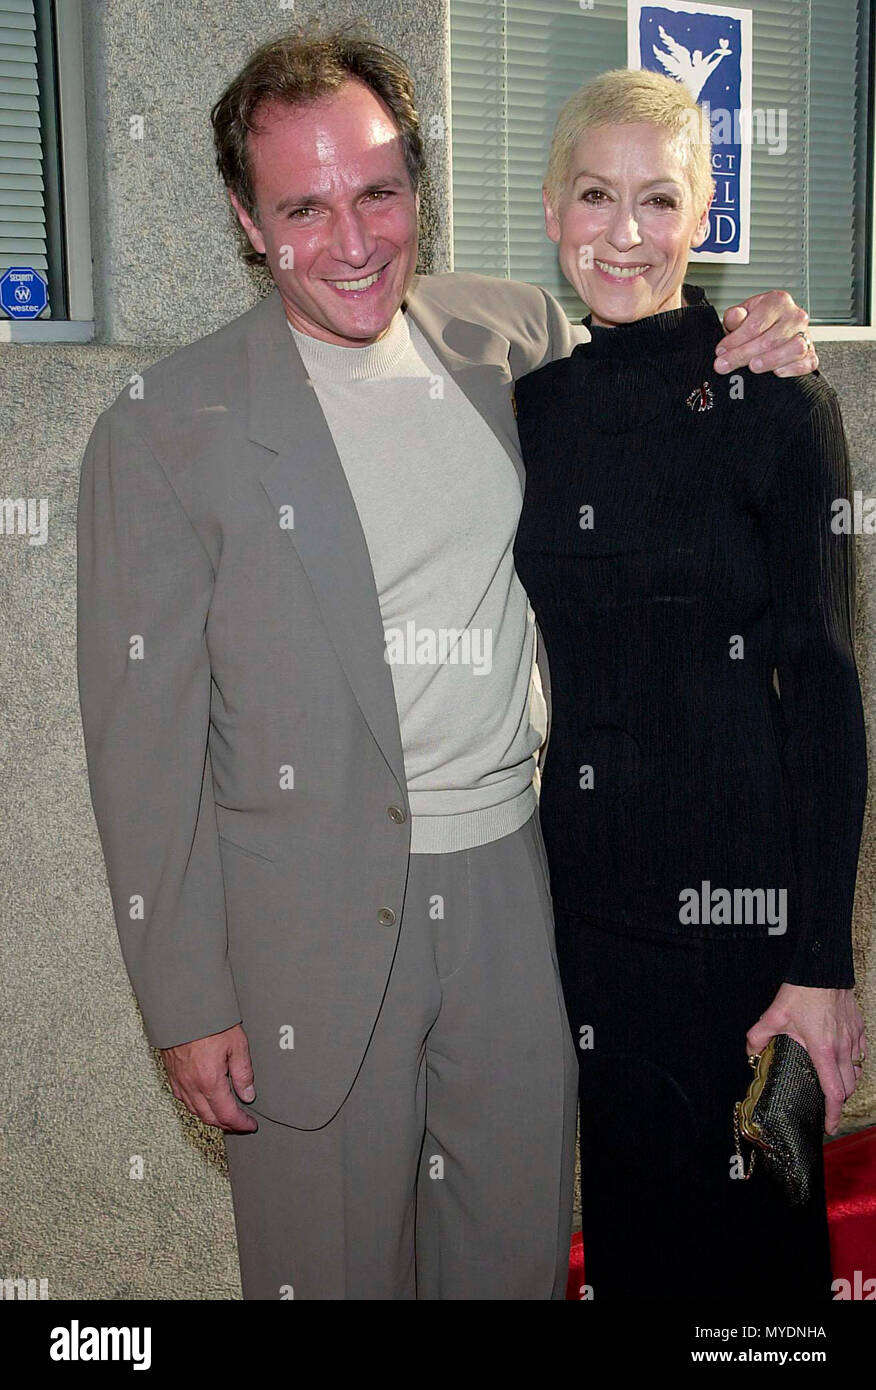 15 Jul 2000, Los Angeles, California, USA --- Robert Desiderio and Judith Light at the 6th Annual Angel Awards from Project Angel Food. 7/15/00-Los Angeles, CA --- Image by © . / USARobert Desiderio and Judith Light Red Carpet Event, Vertical, USA, Film Industry, Celebrities,  Photography, Bestof, Arts Culture and Entertainment, Topix Celebrities fashion /  Vertical, Best of, Event in Hollywood Life - California,  Red Carpet and backstage, USA, Film Industry, Celebrities,  movie celebrities, TV celebrities, Music celebrities, Photography, Bestof, Arts Culture and Entertainment,  Topix,  vertic Stock Photo